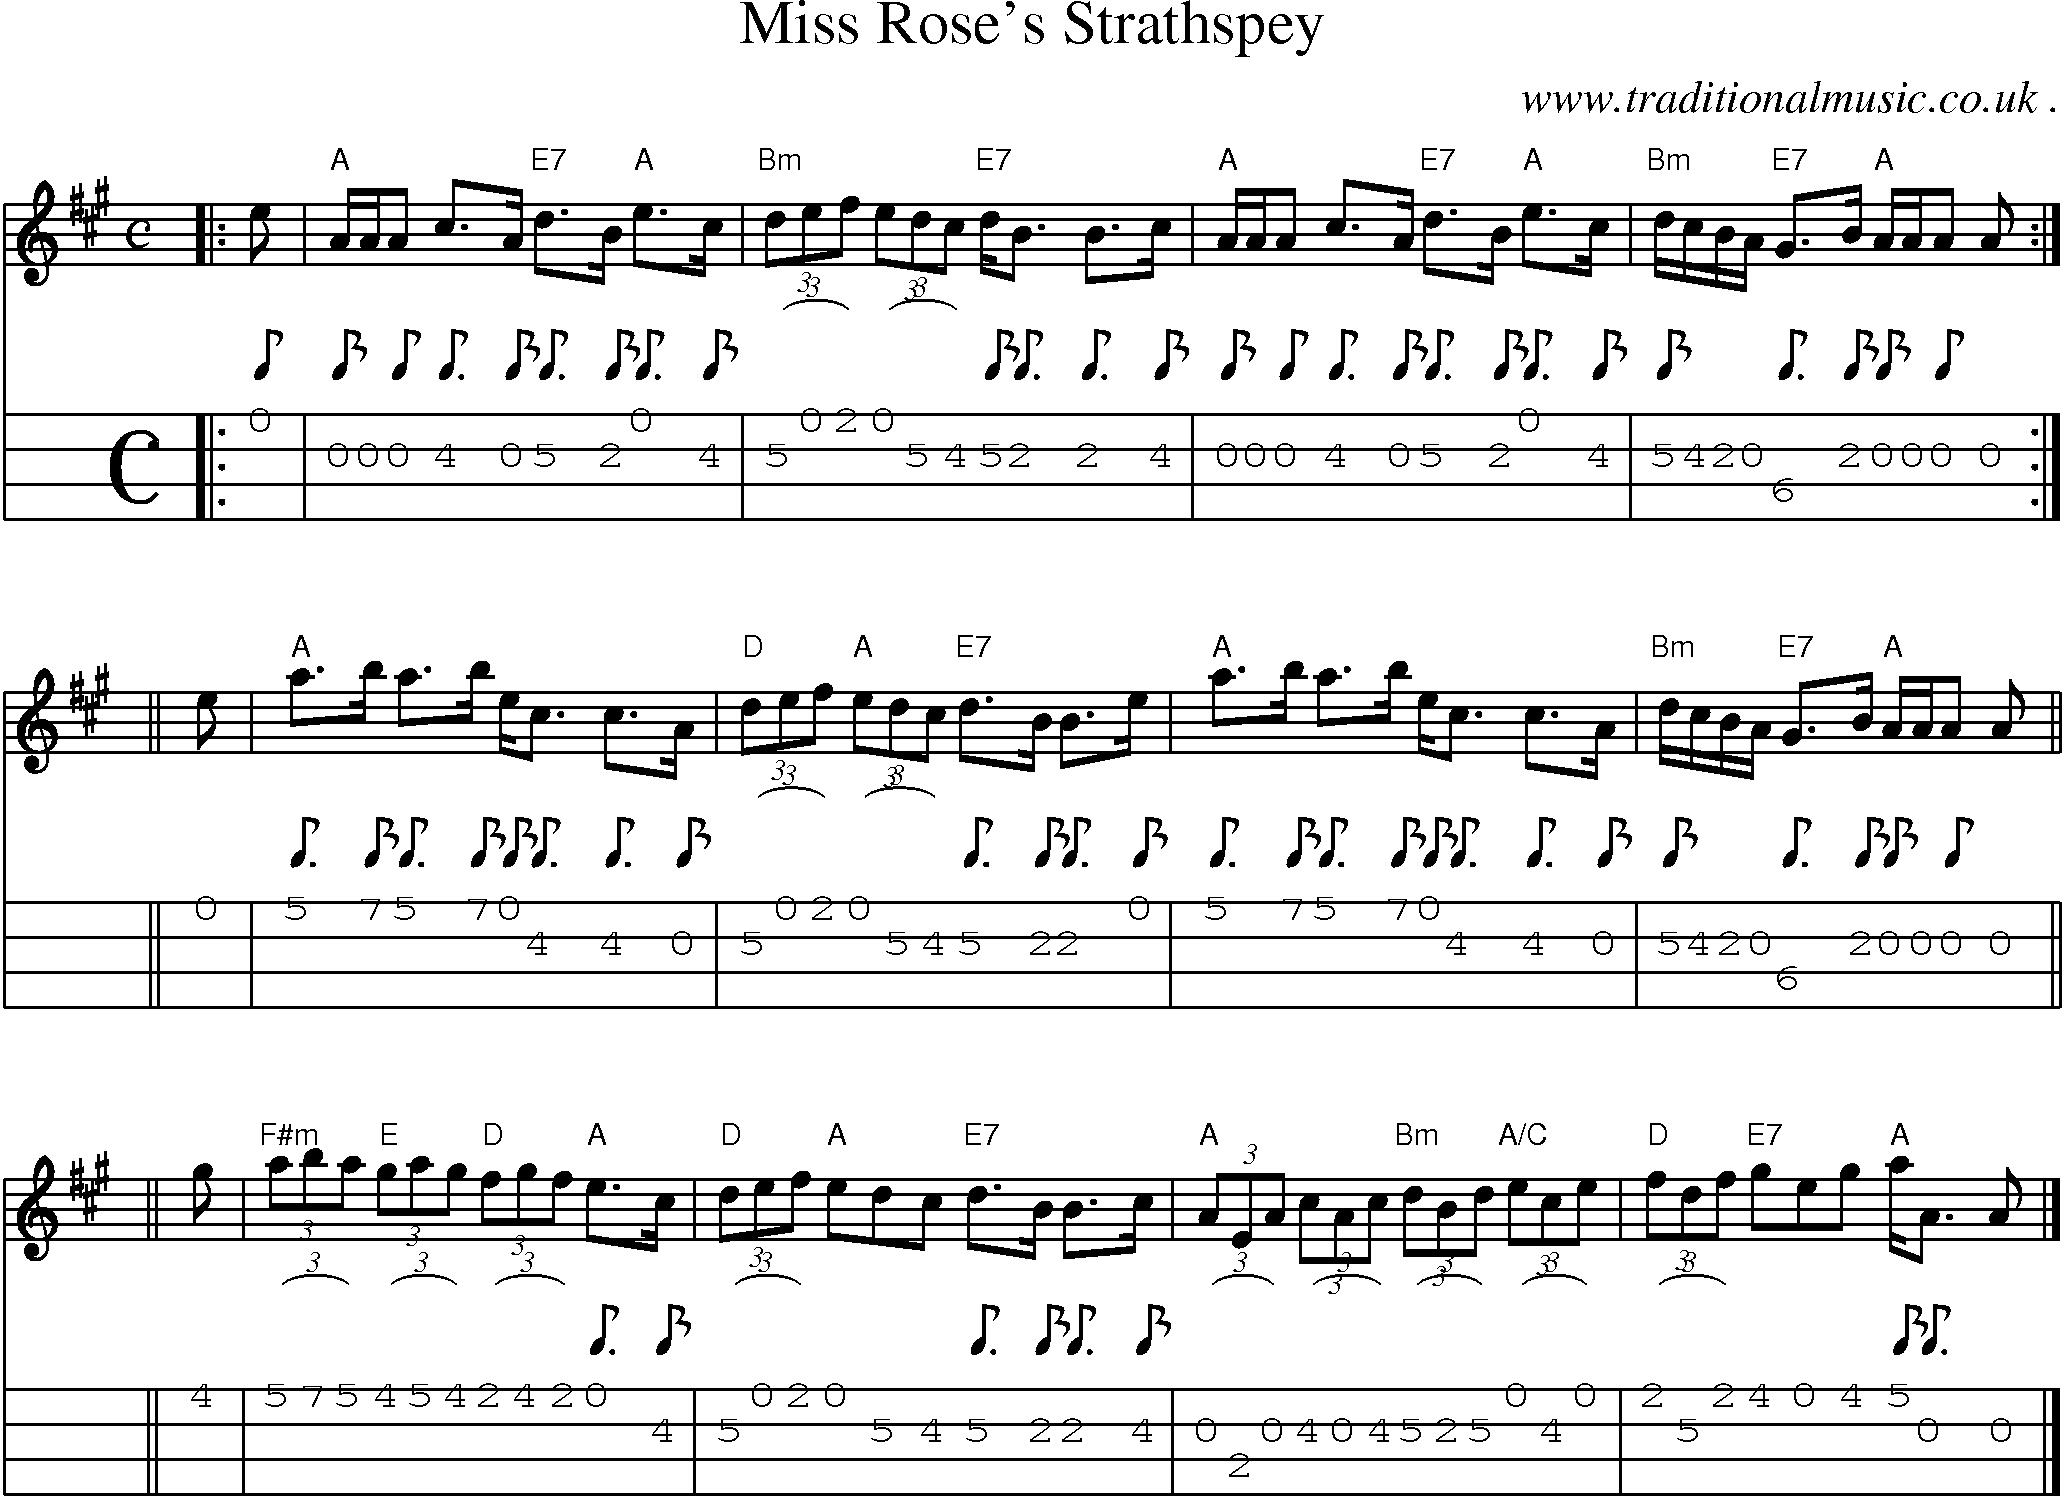 Sheet-music  score, Chords and Mandolin Tabs for Miss Roses Strathspey